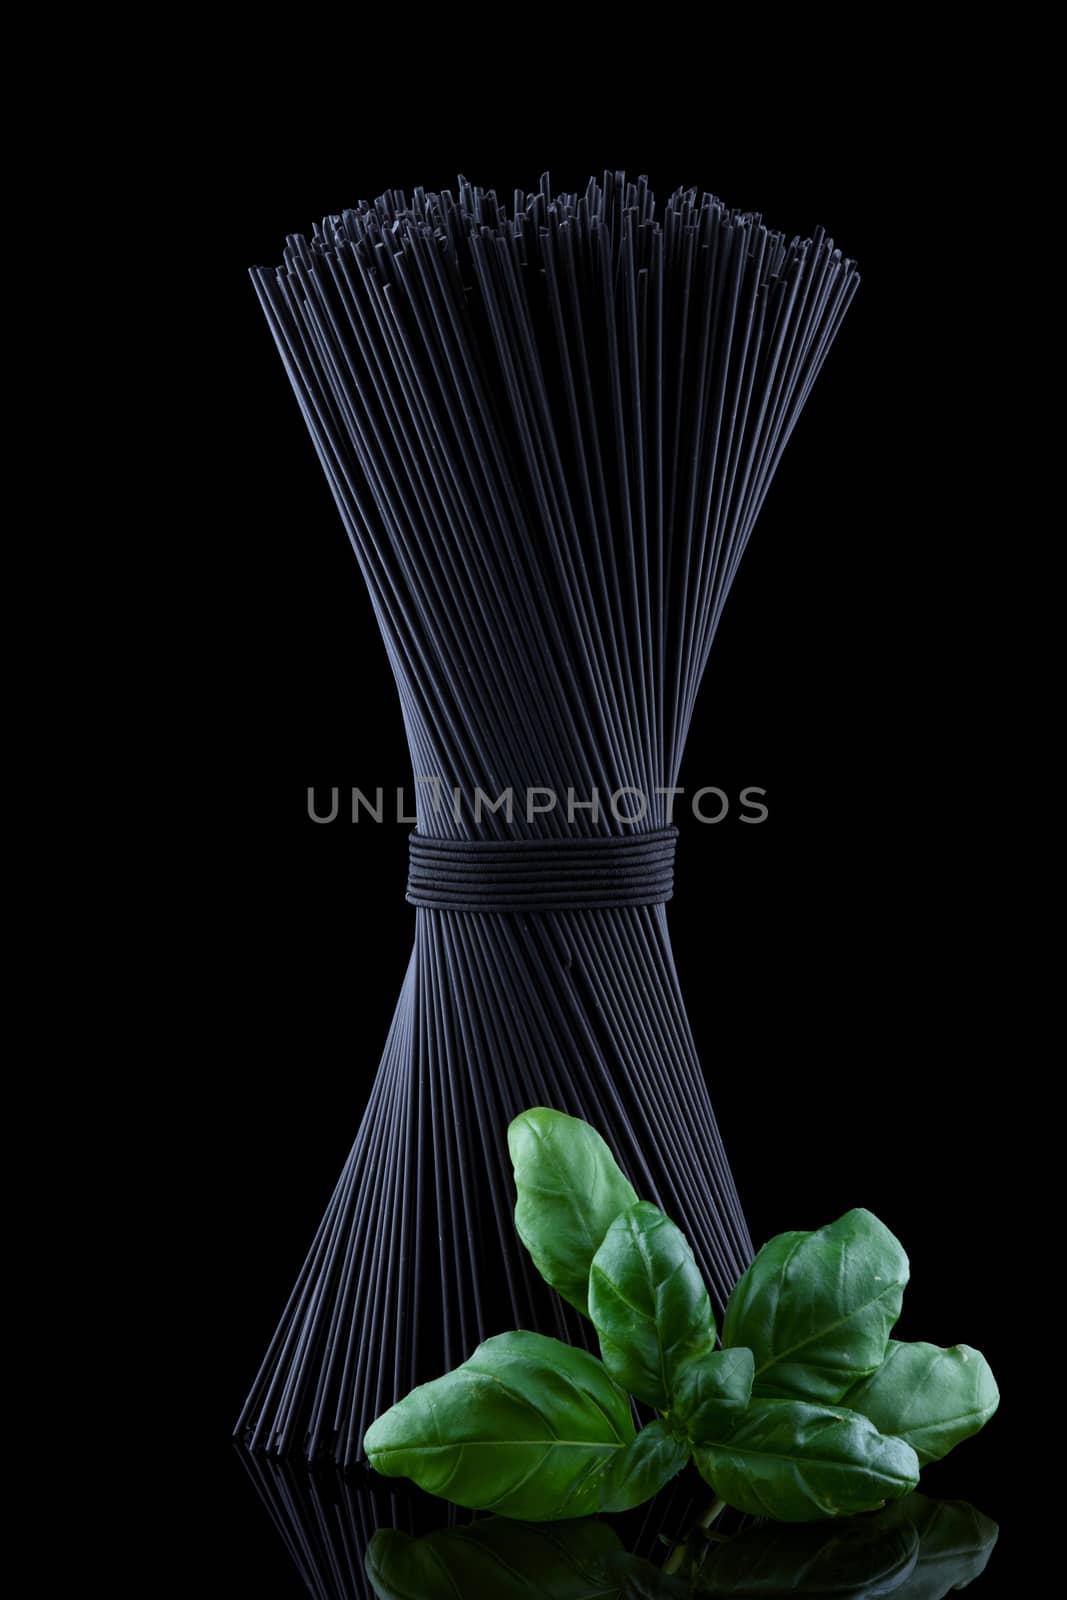 Black spaghetti with basel leaves on black background by Fischeron